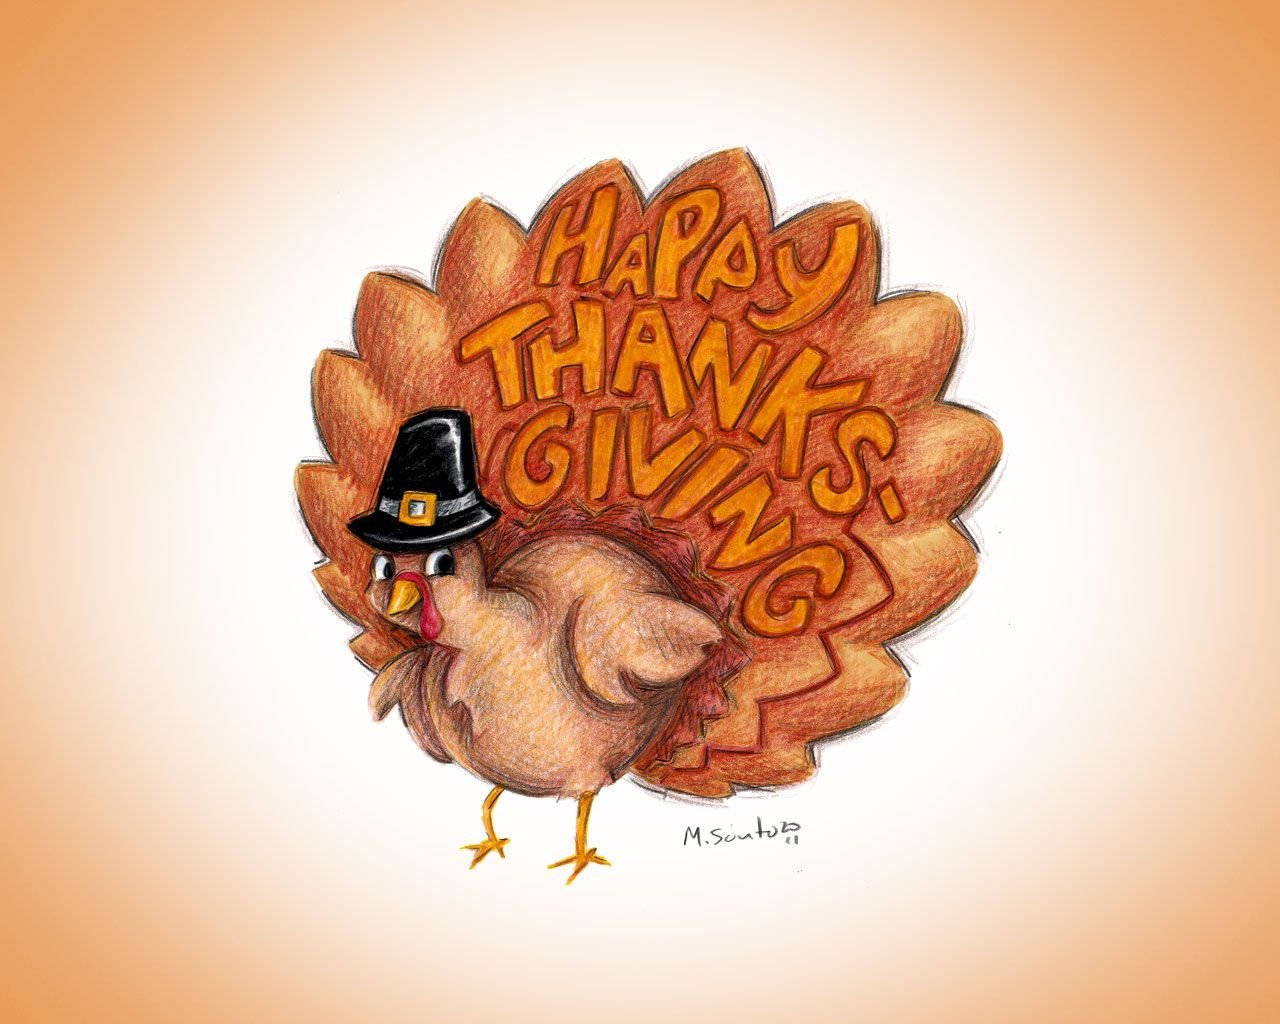 Celebrate Turkey Day with a smile - Happy Thanksgiving! Wallpaper